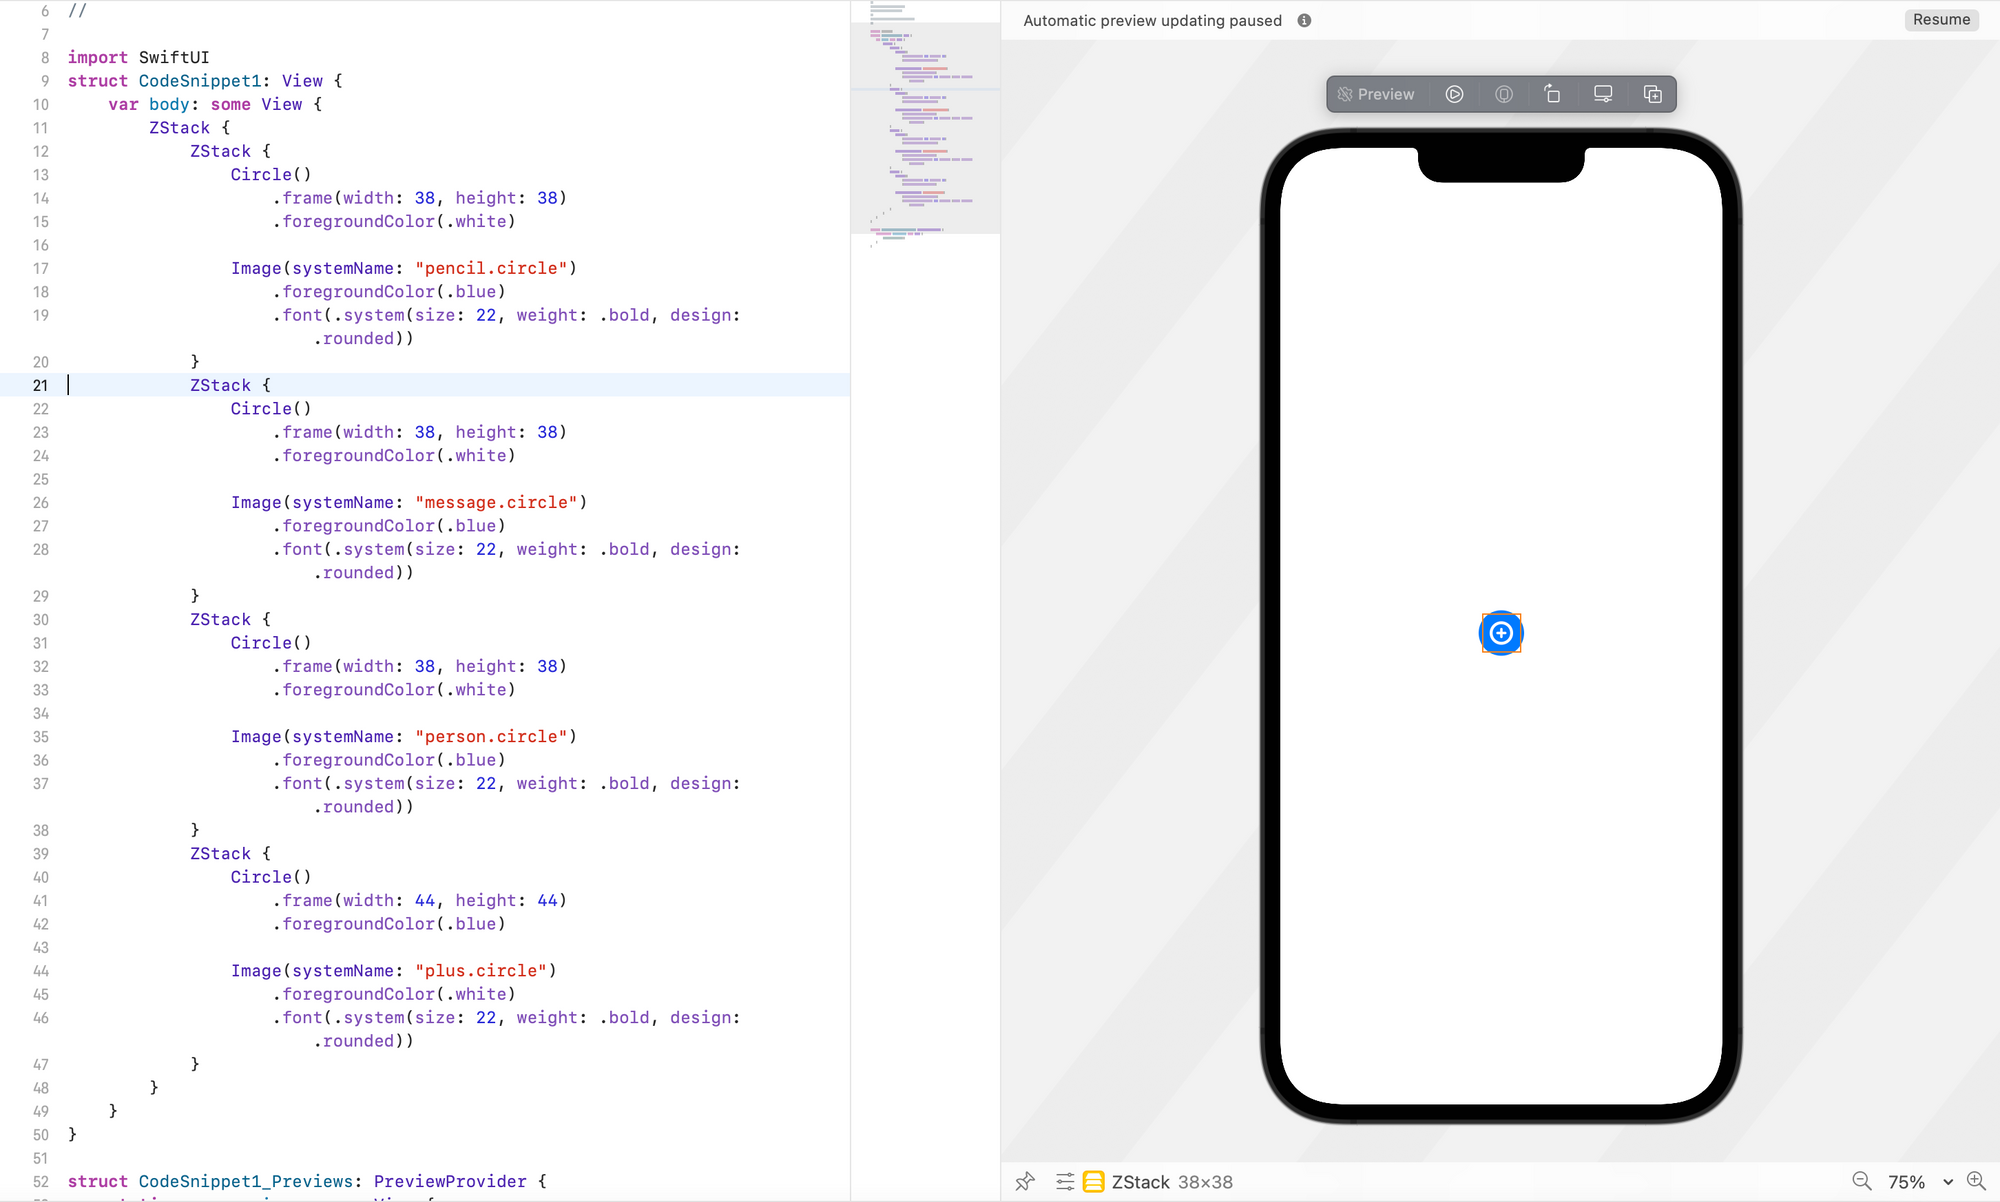 Xcode showing the code below in the SwiftUI Editor